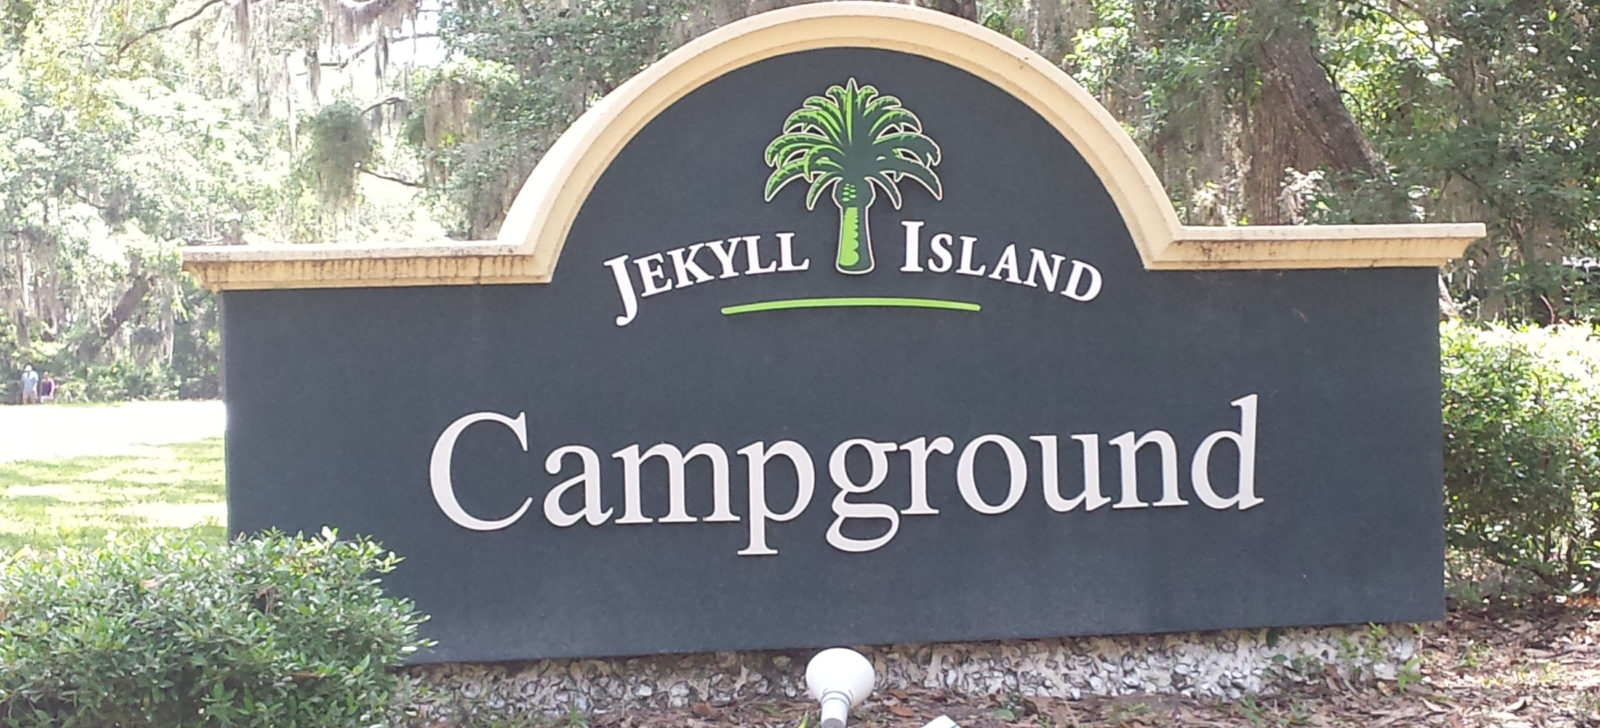 sign for Jekyll Island Campground